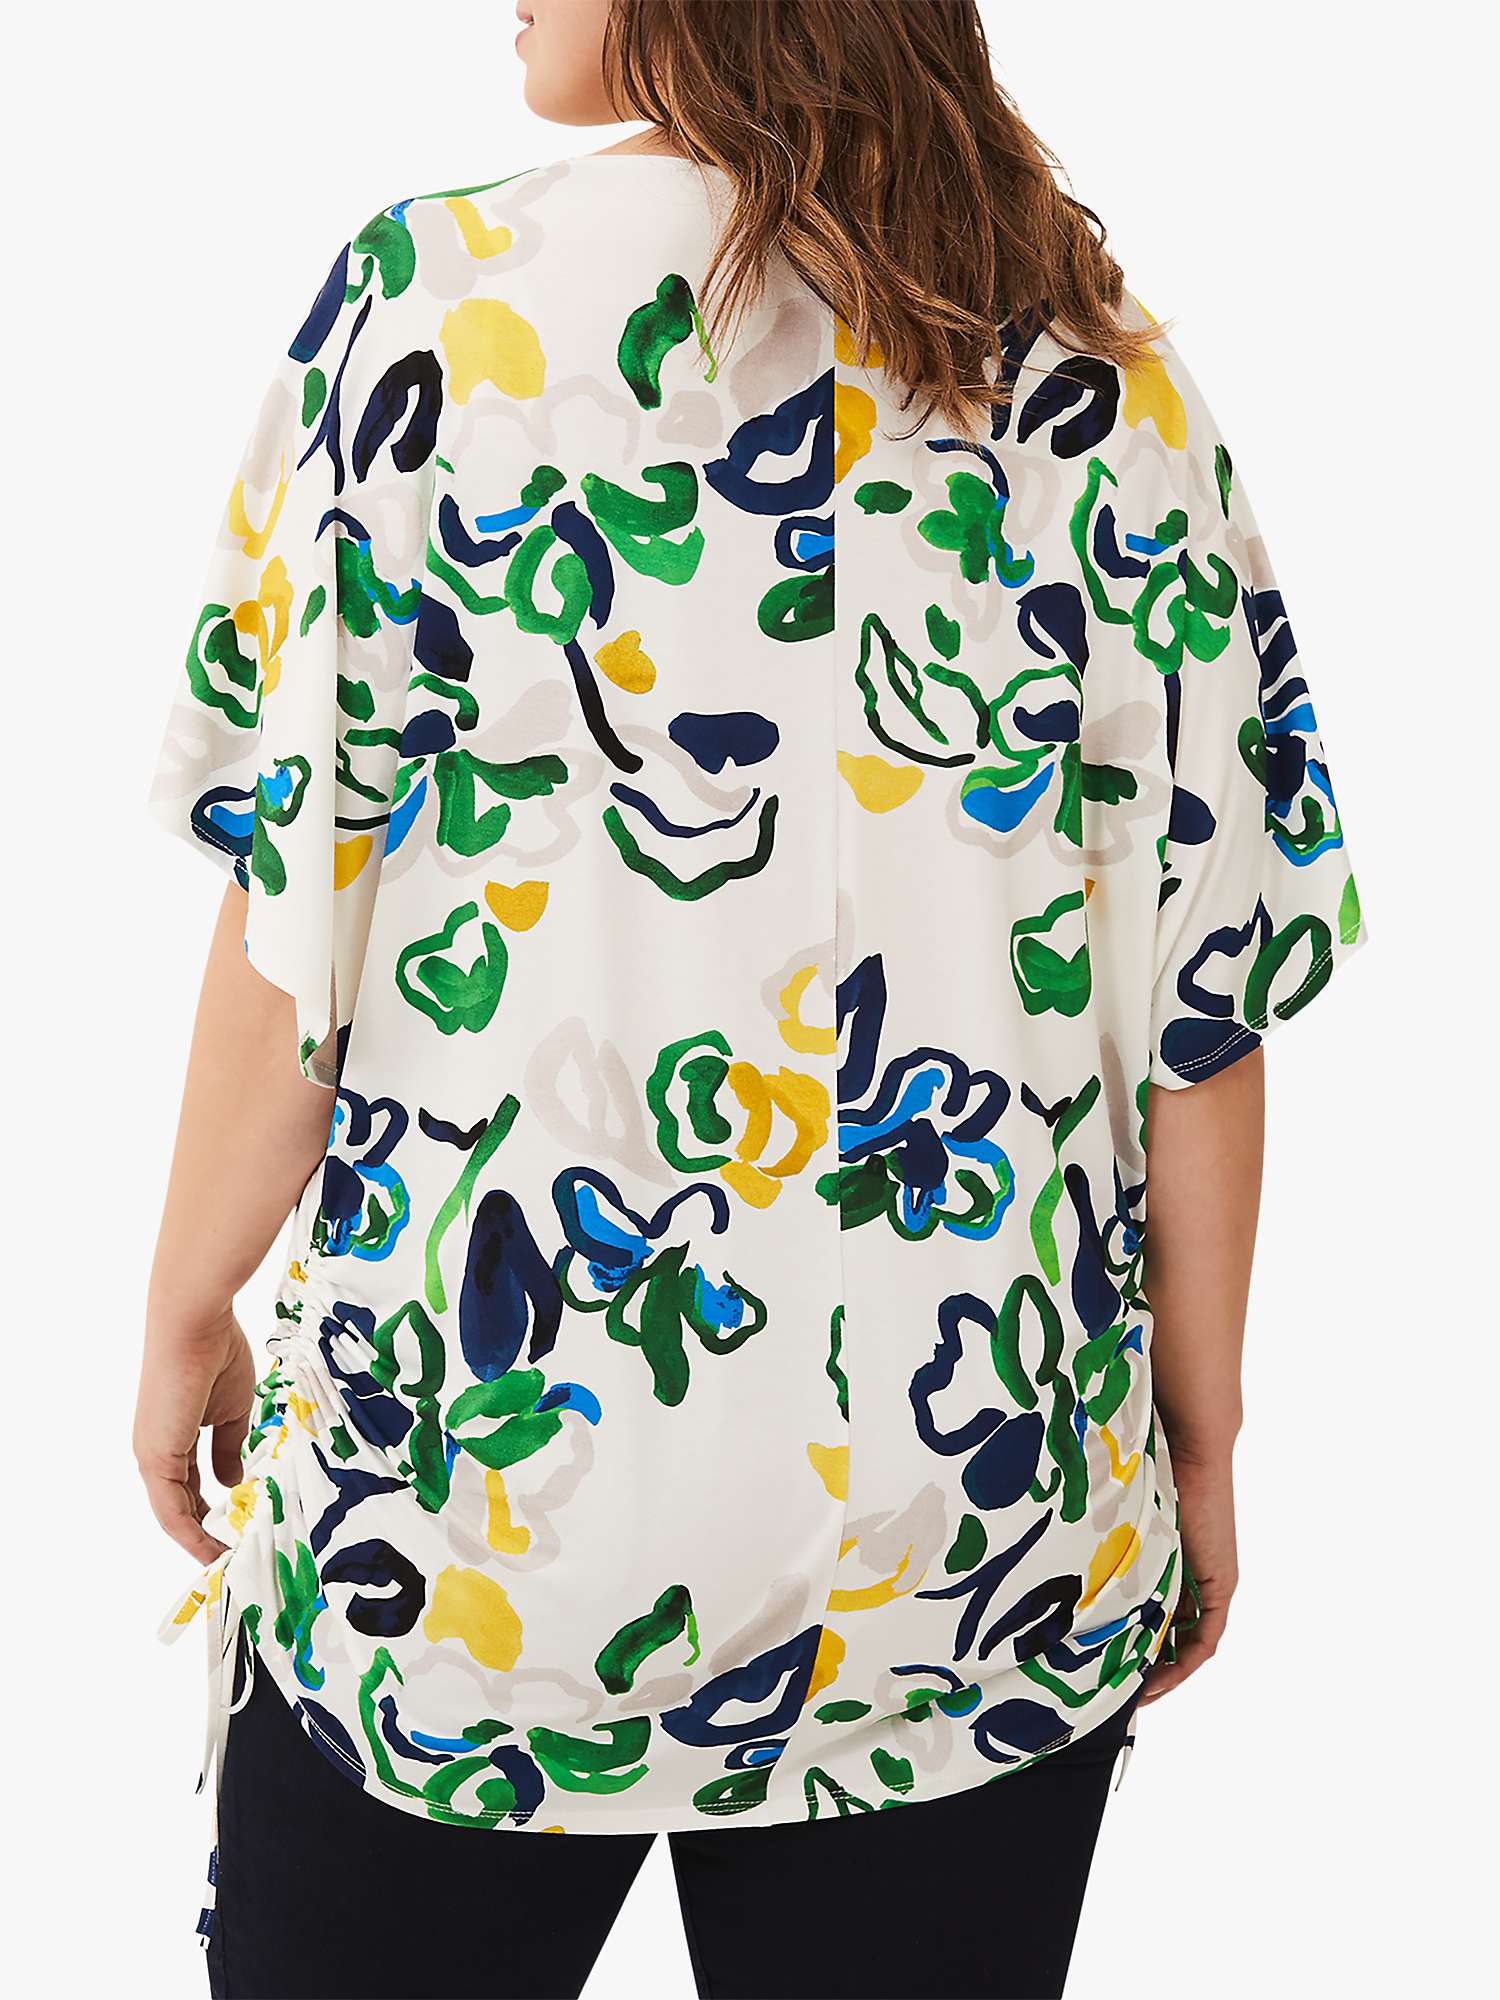 Buy Studio 8 Avery Abstract Print Top, Ivory/Multi Online at johnlewis.com